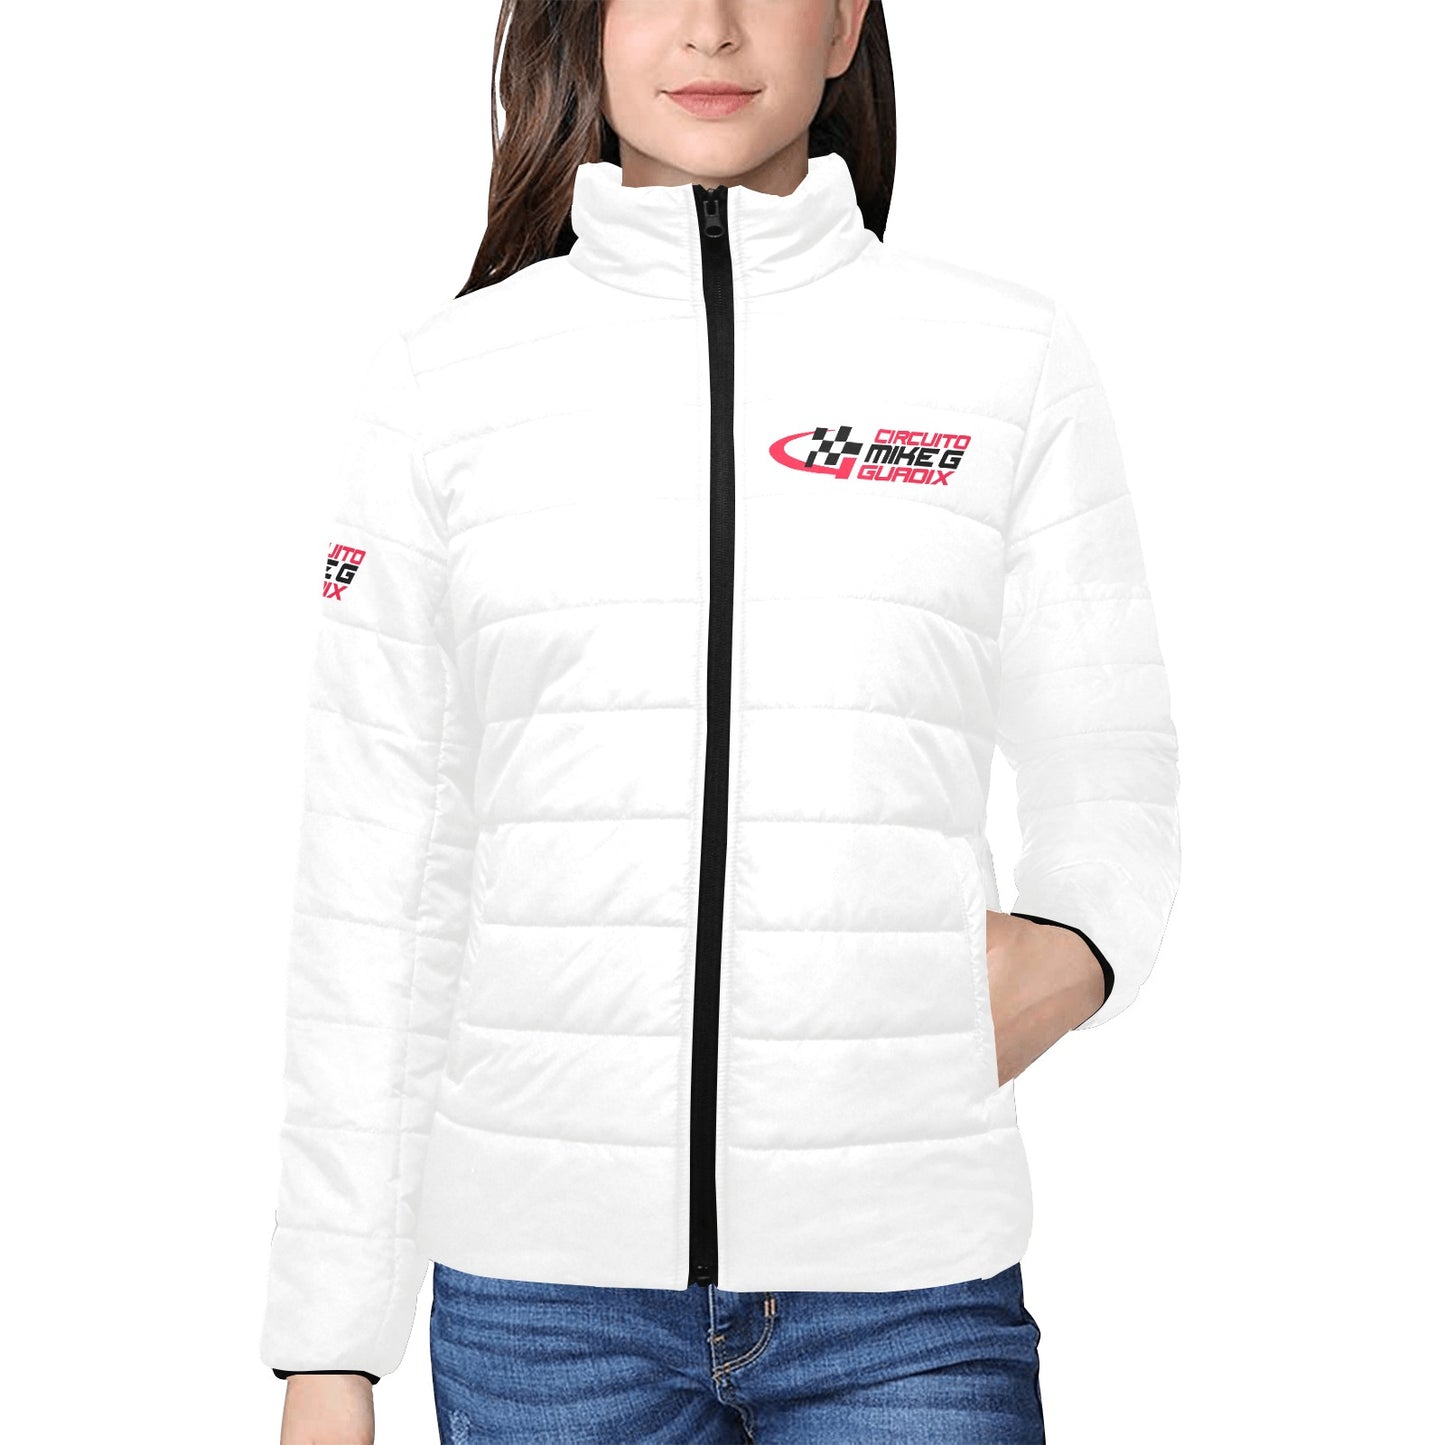 CIRCUITO MIKE G GUADIX Women's quilted puffer jacket - circuit white